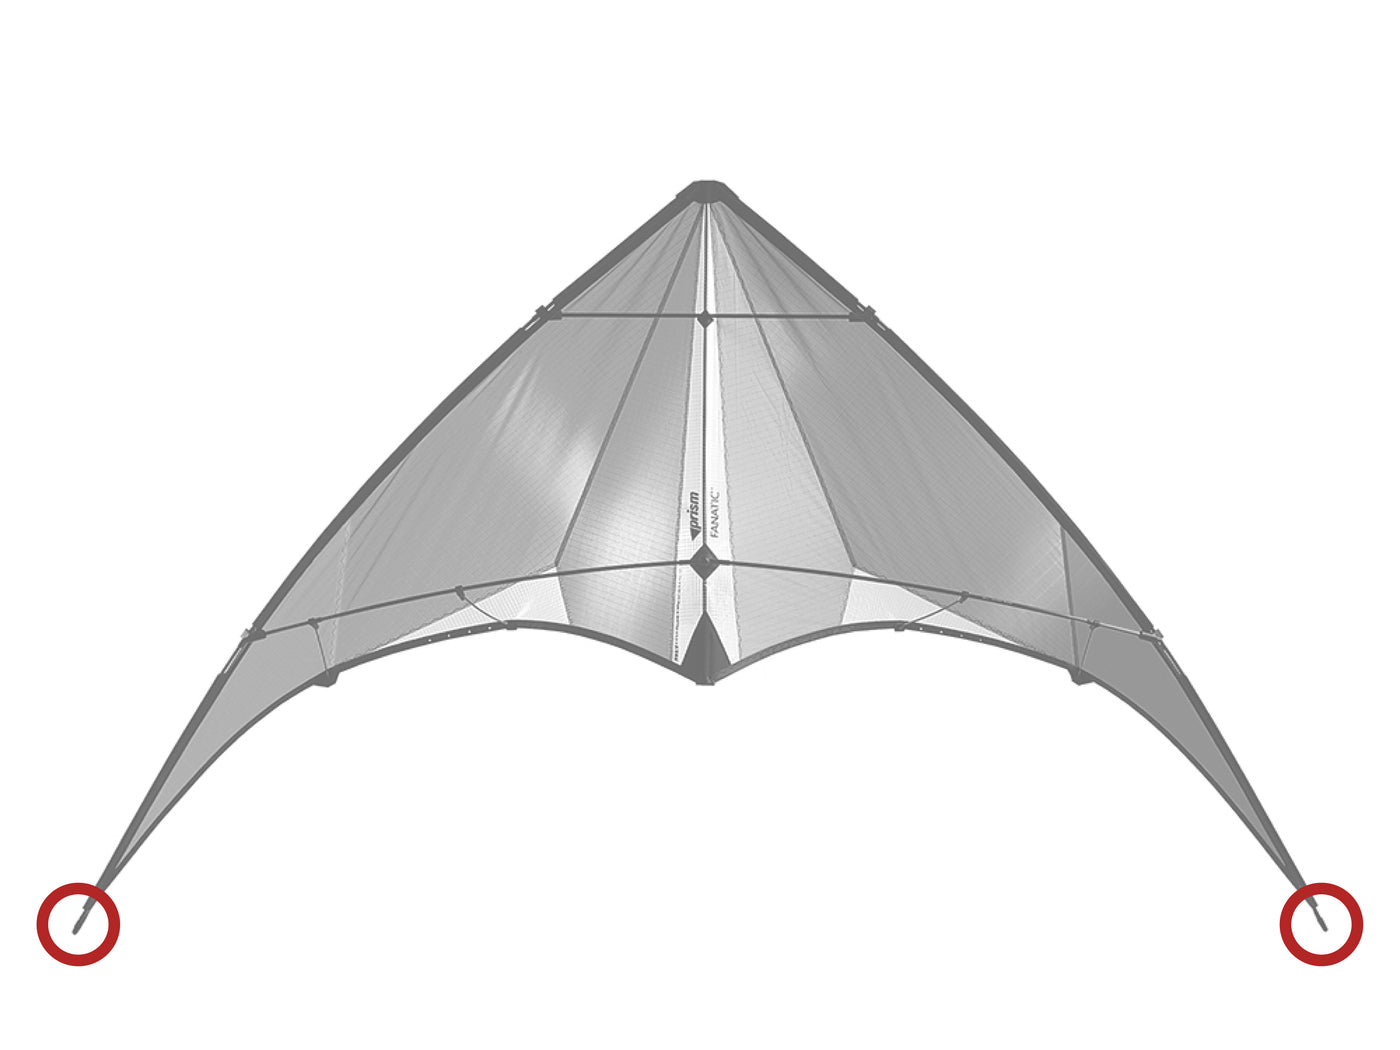 Diagram showing location of the Fanatic Wingtip Nocks on the kite.